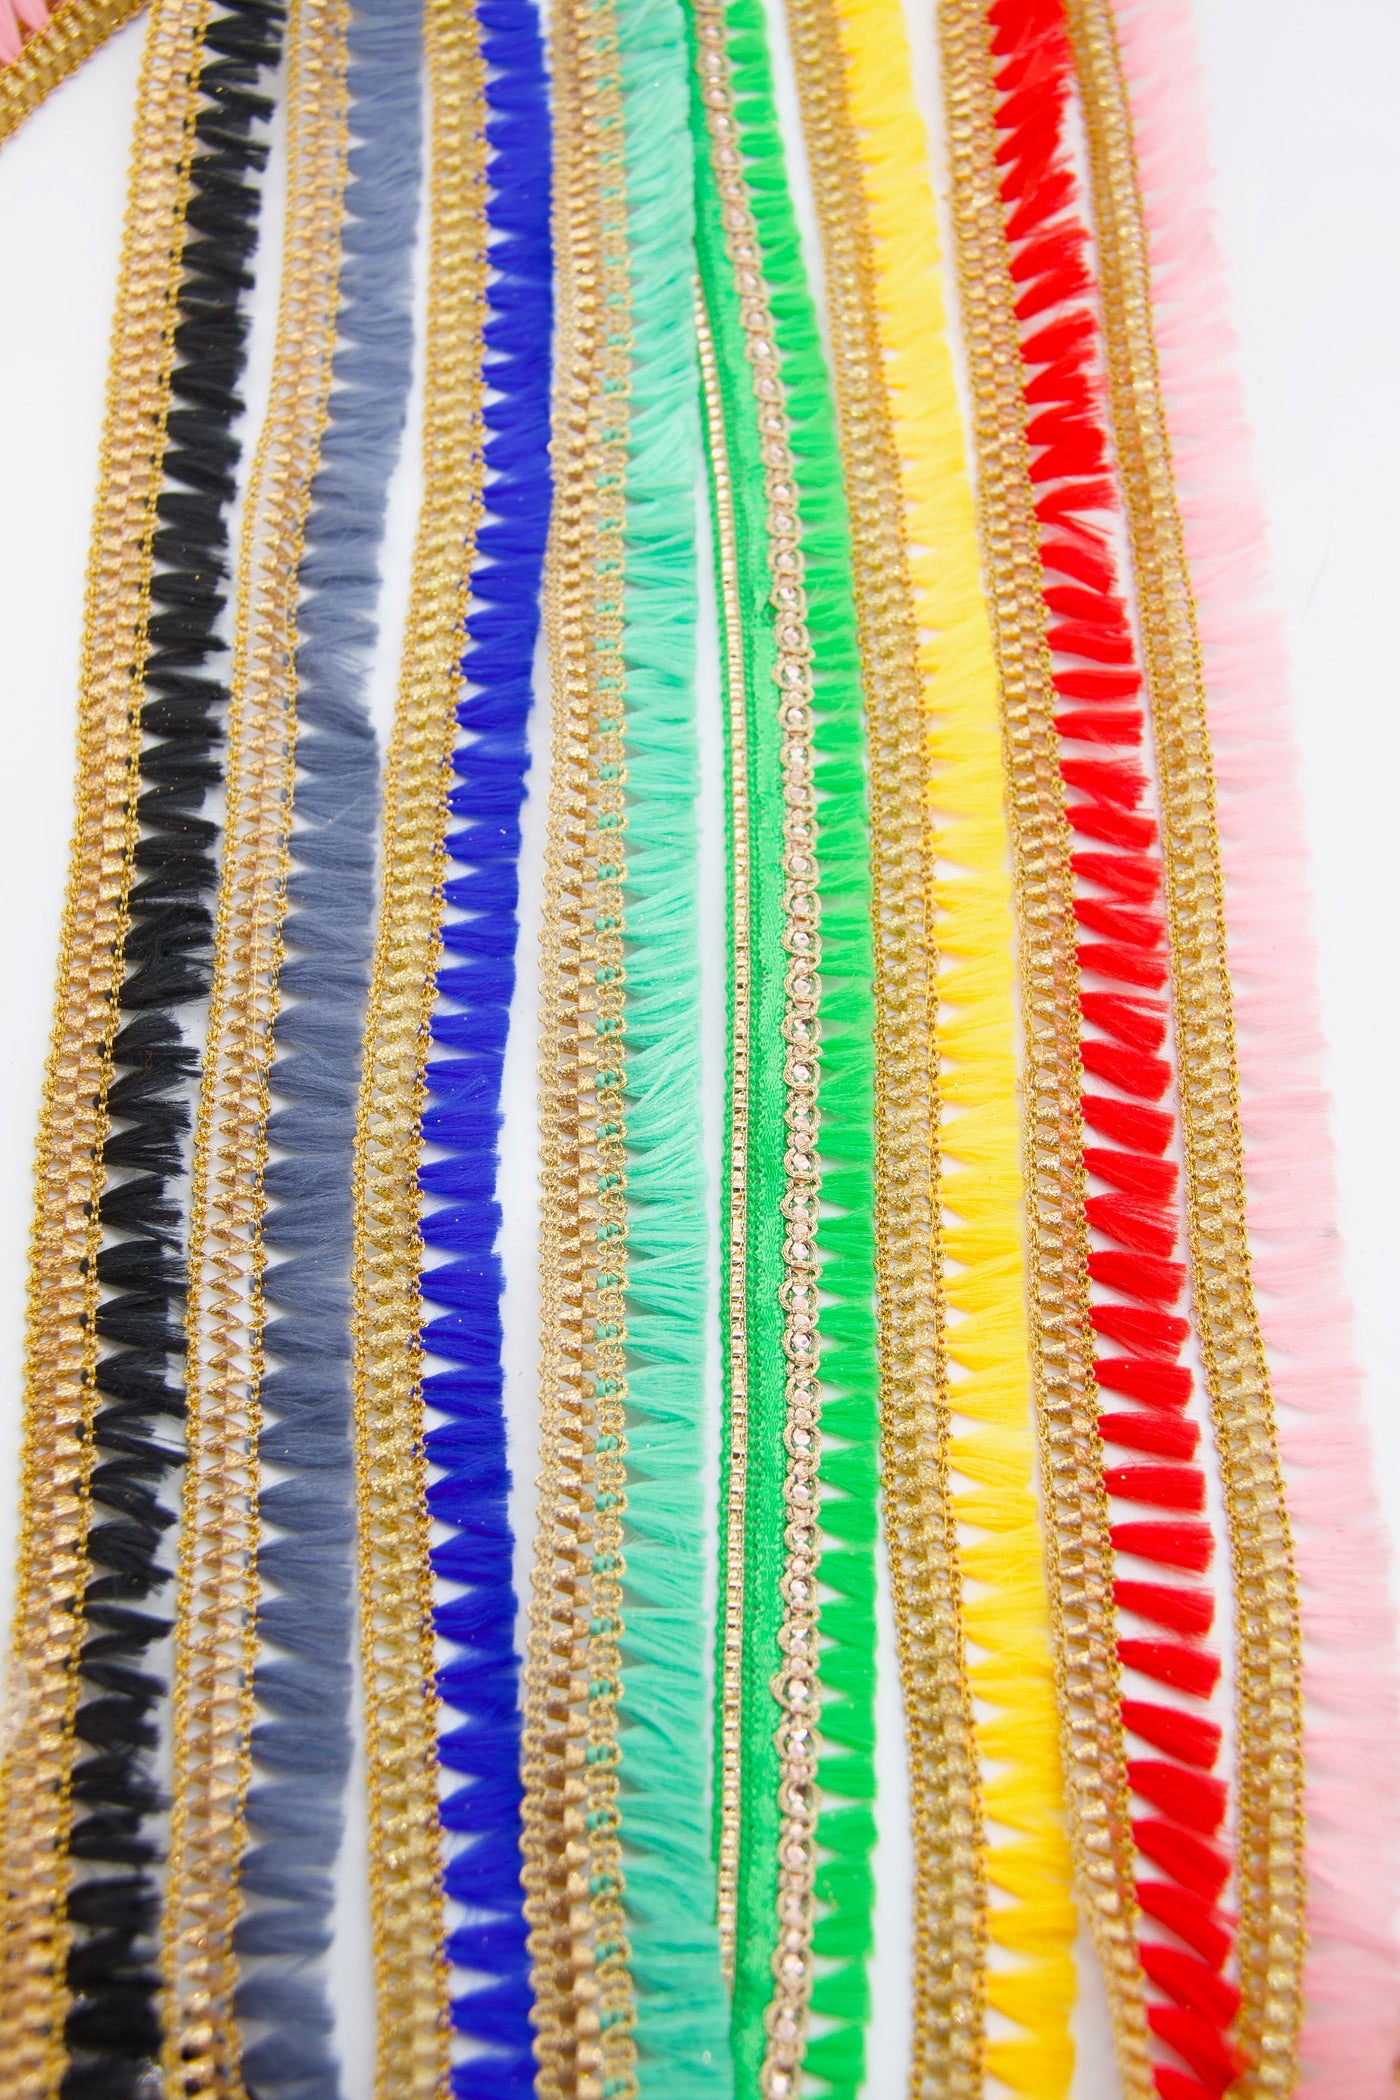 Skinny Indian Ribbon, Holiday Craft or Jewelry Supplies, Tassels and trim, all in one